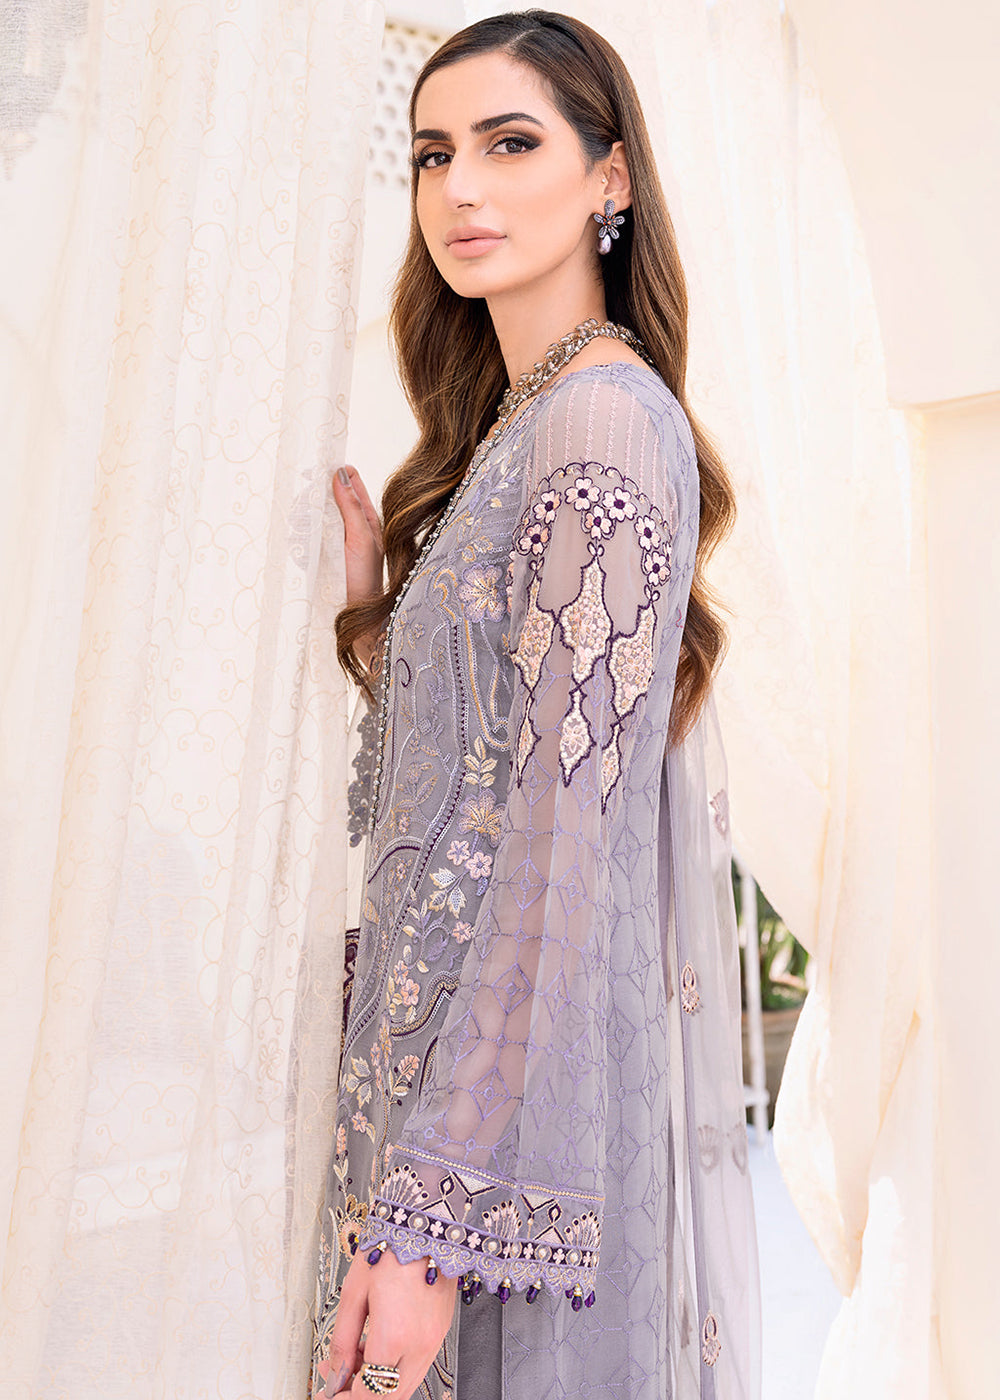 Buy Now Purple Embroidered Suit - Chiffon Vol 23 by Ramsha - #F-2310 Online in USA, UK, Canada & Worldwide at Empress Clothing.